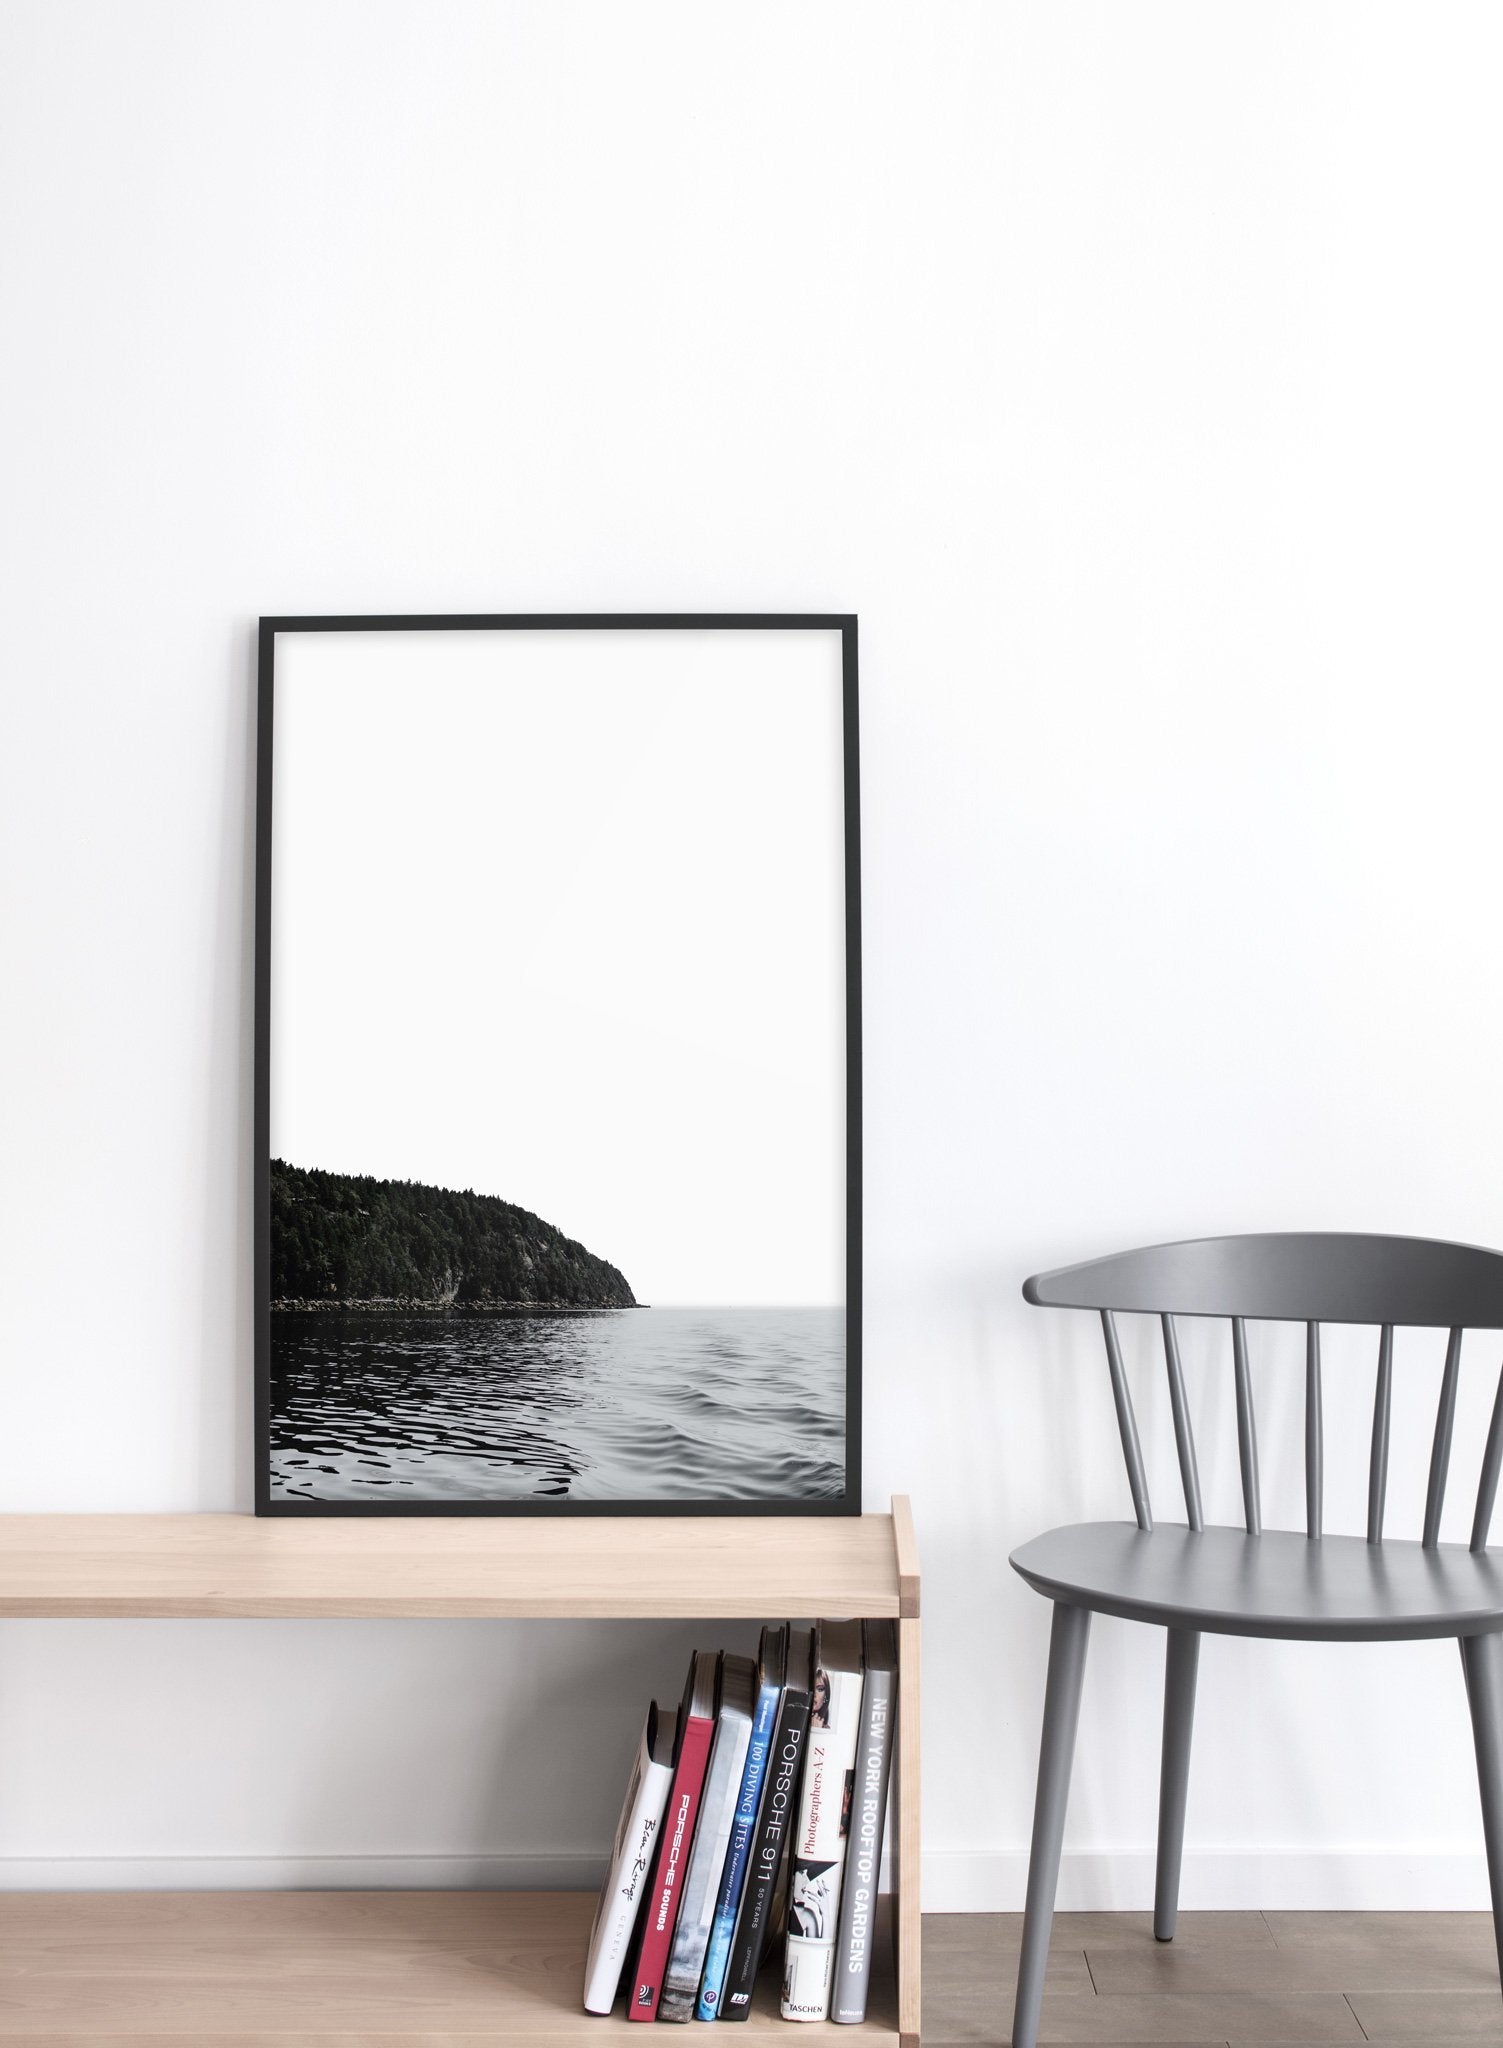 Serenity modern minimalist nature photography poster by Opposite Wall - Living room